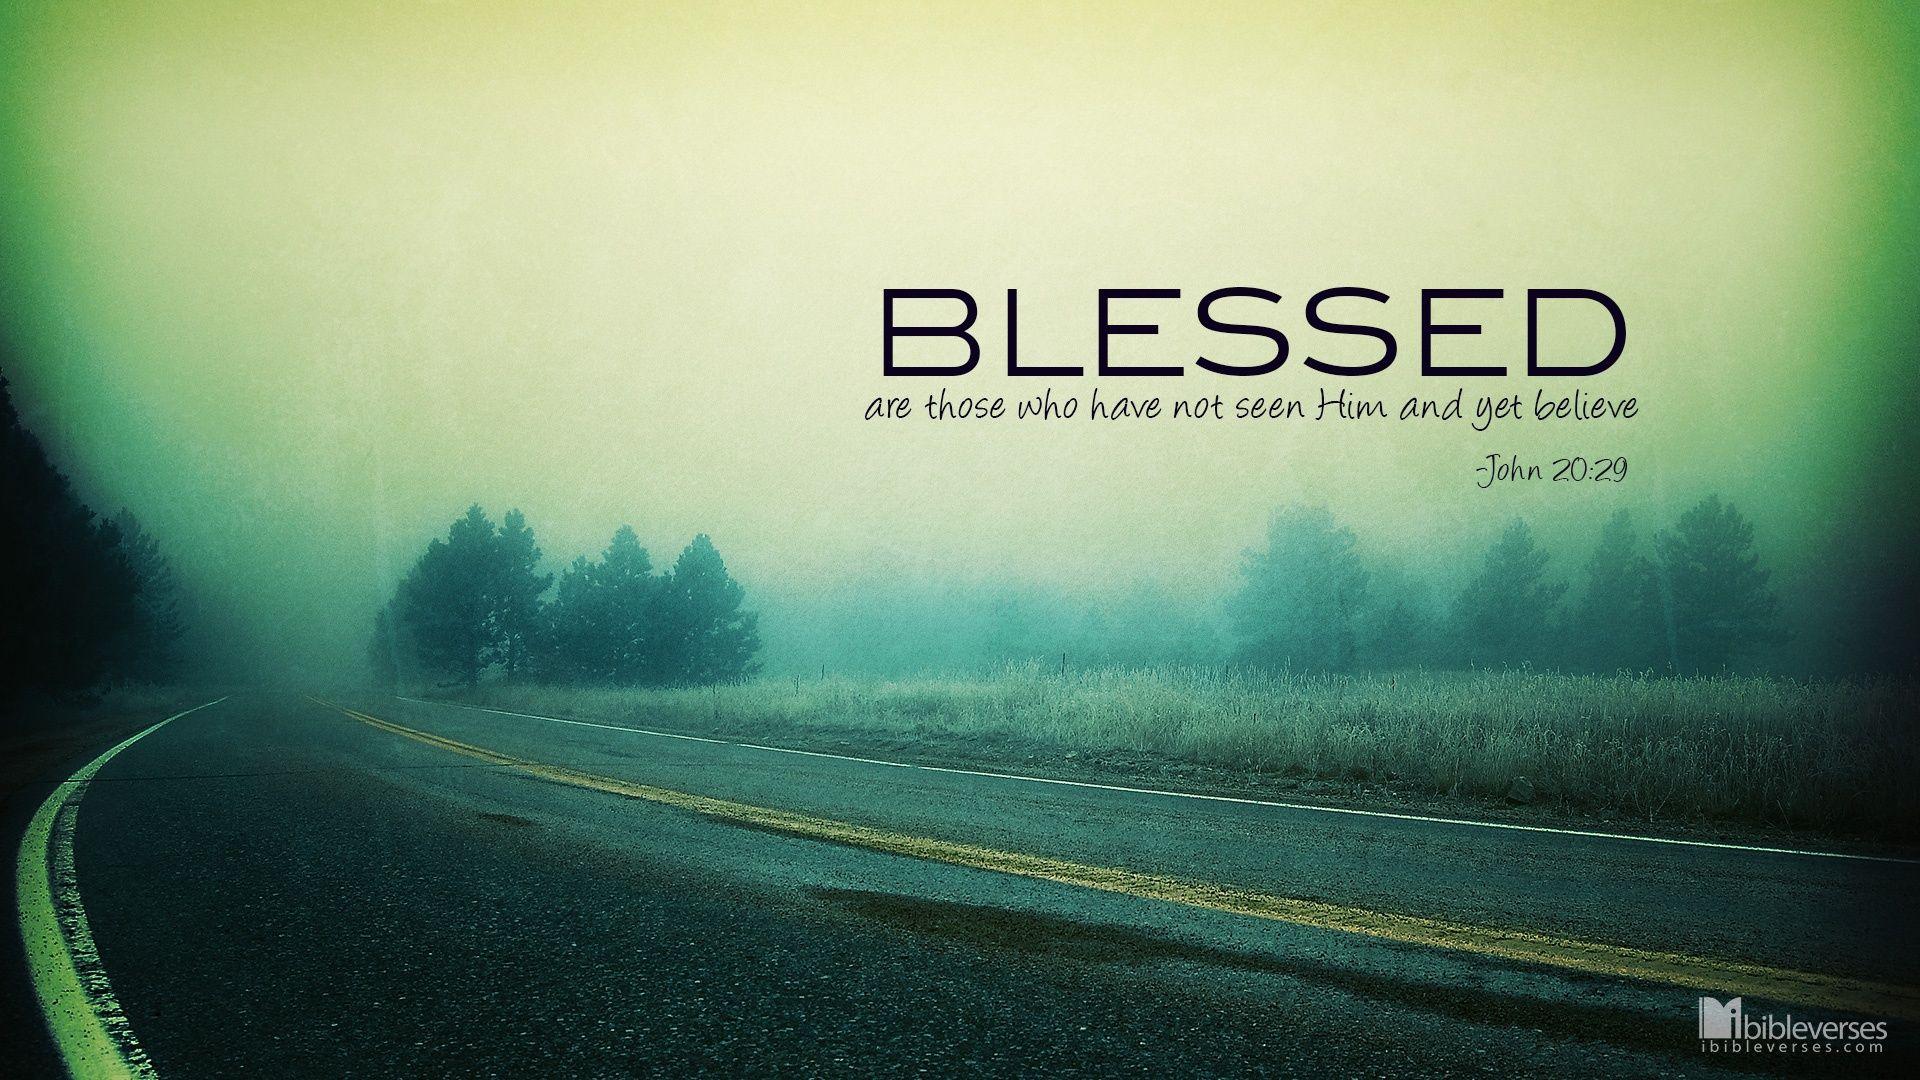 Blessings Background Images HD Pictures and Wallpaper For Free Download   Pngtree